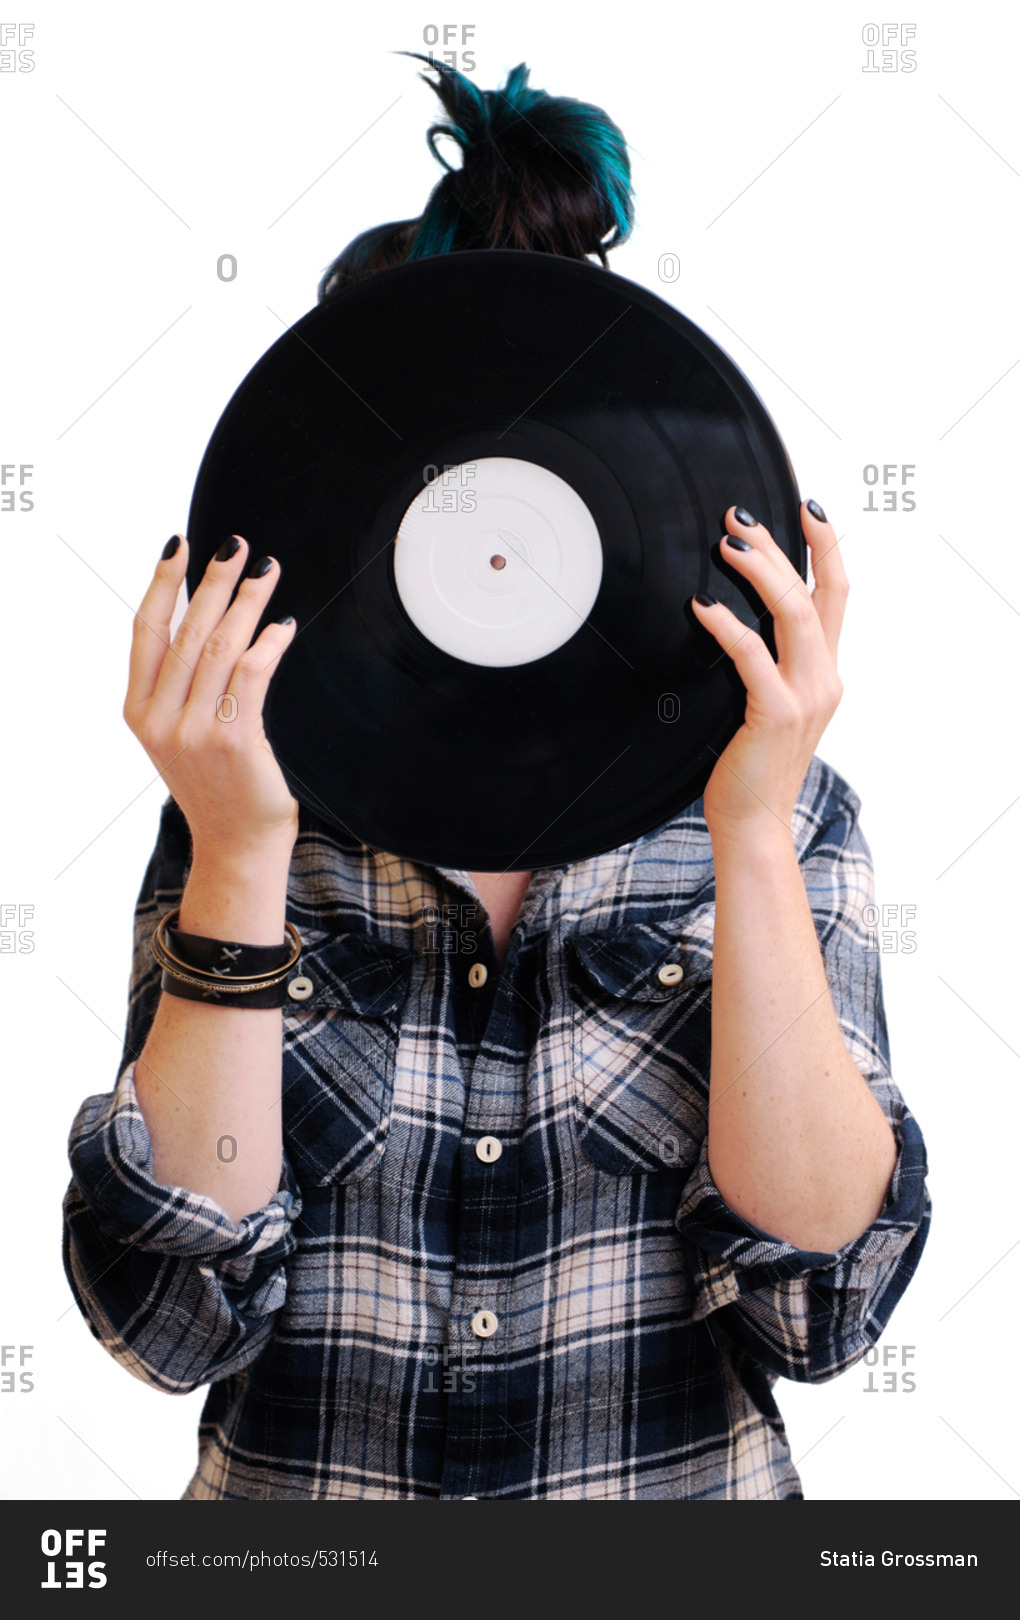 Girl holding a record in front of her face